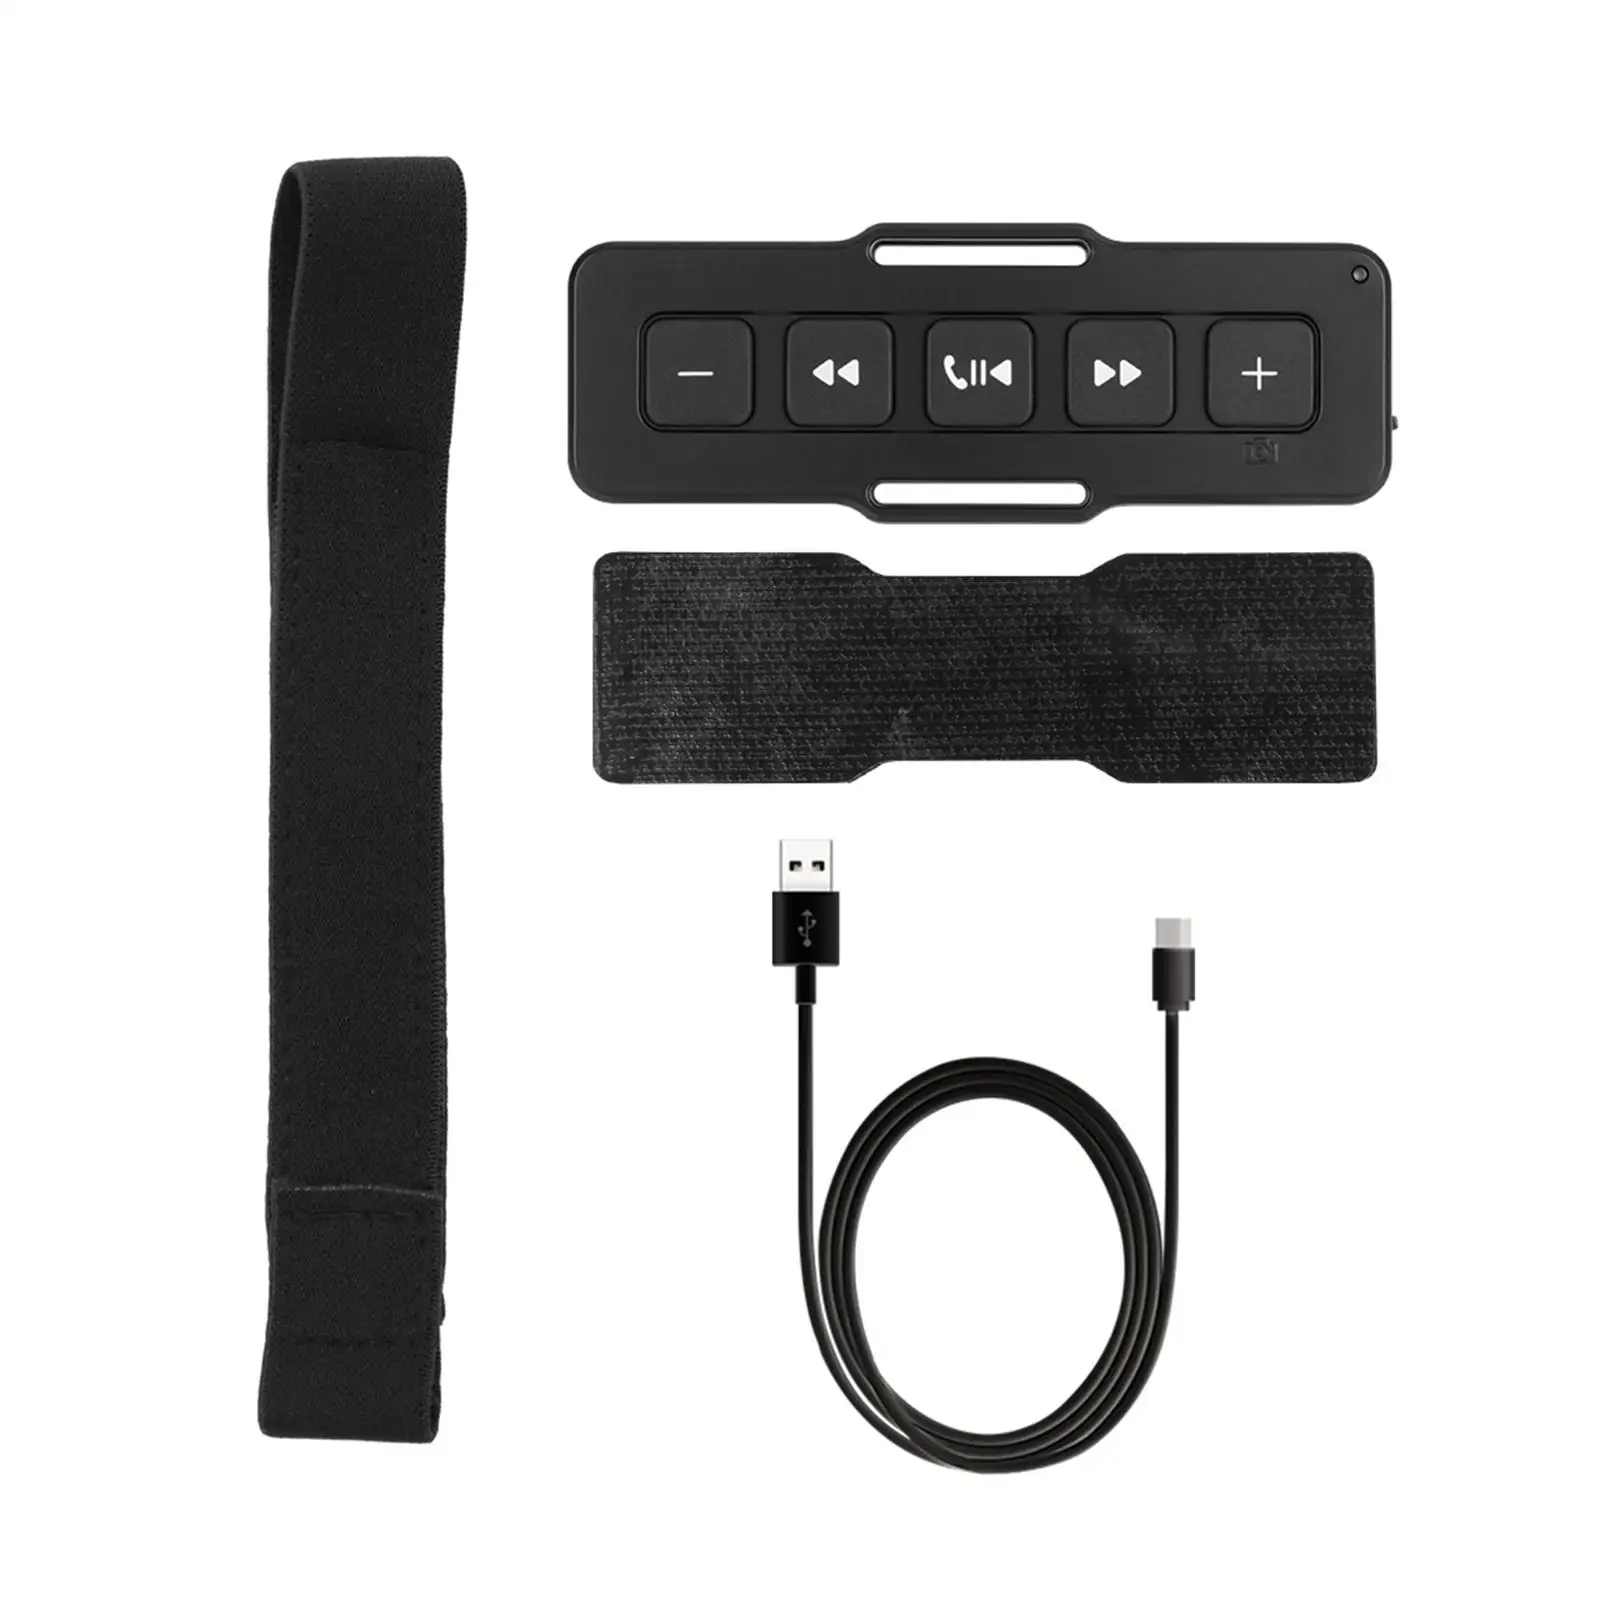 Media Control 5 Button IPX4 Hands Free Universal Easy to Carry Portable Portable Motorcycle Remote Controller for Skiing